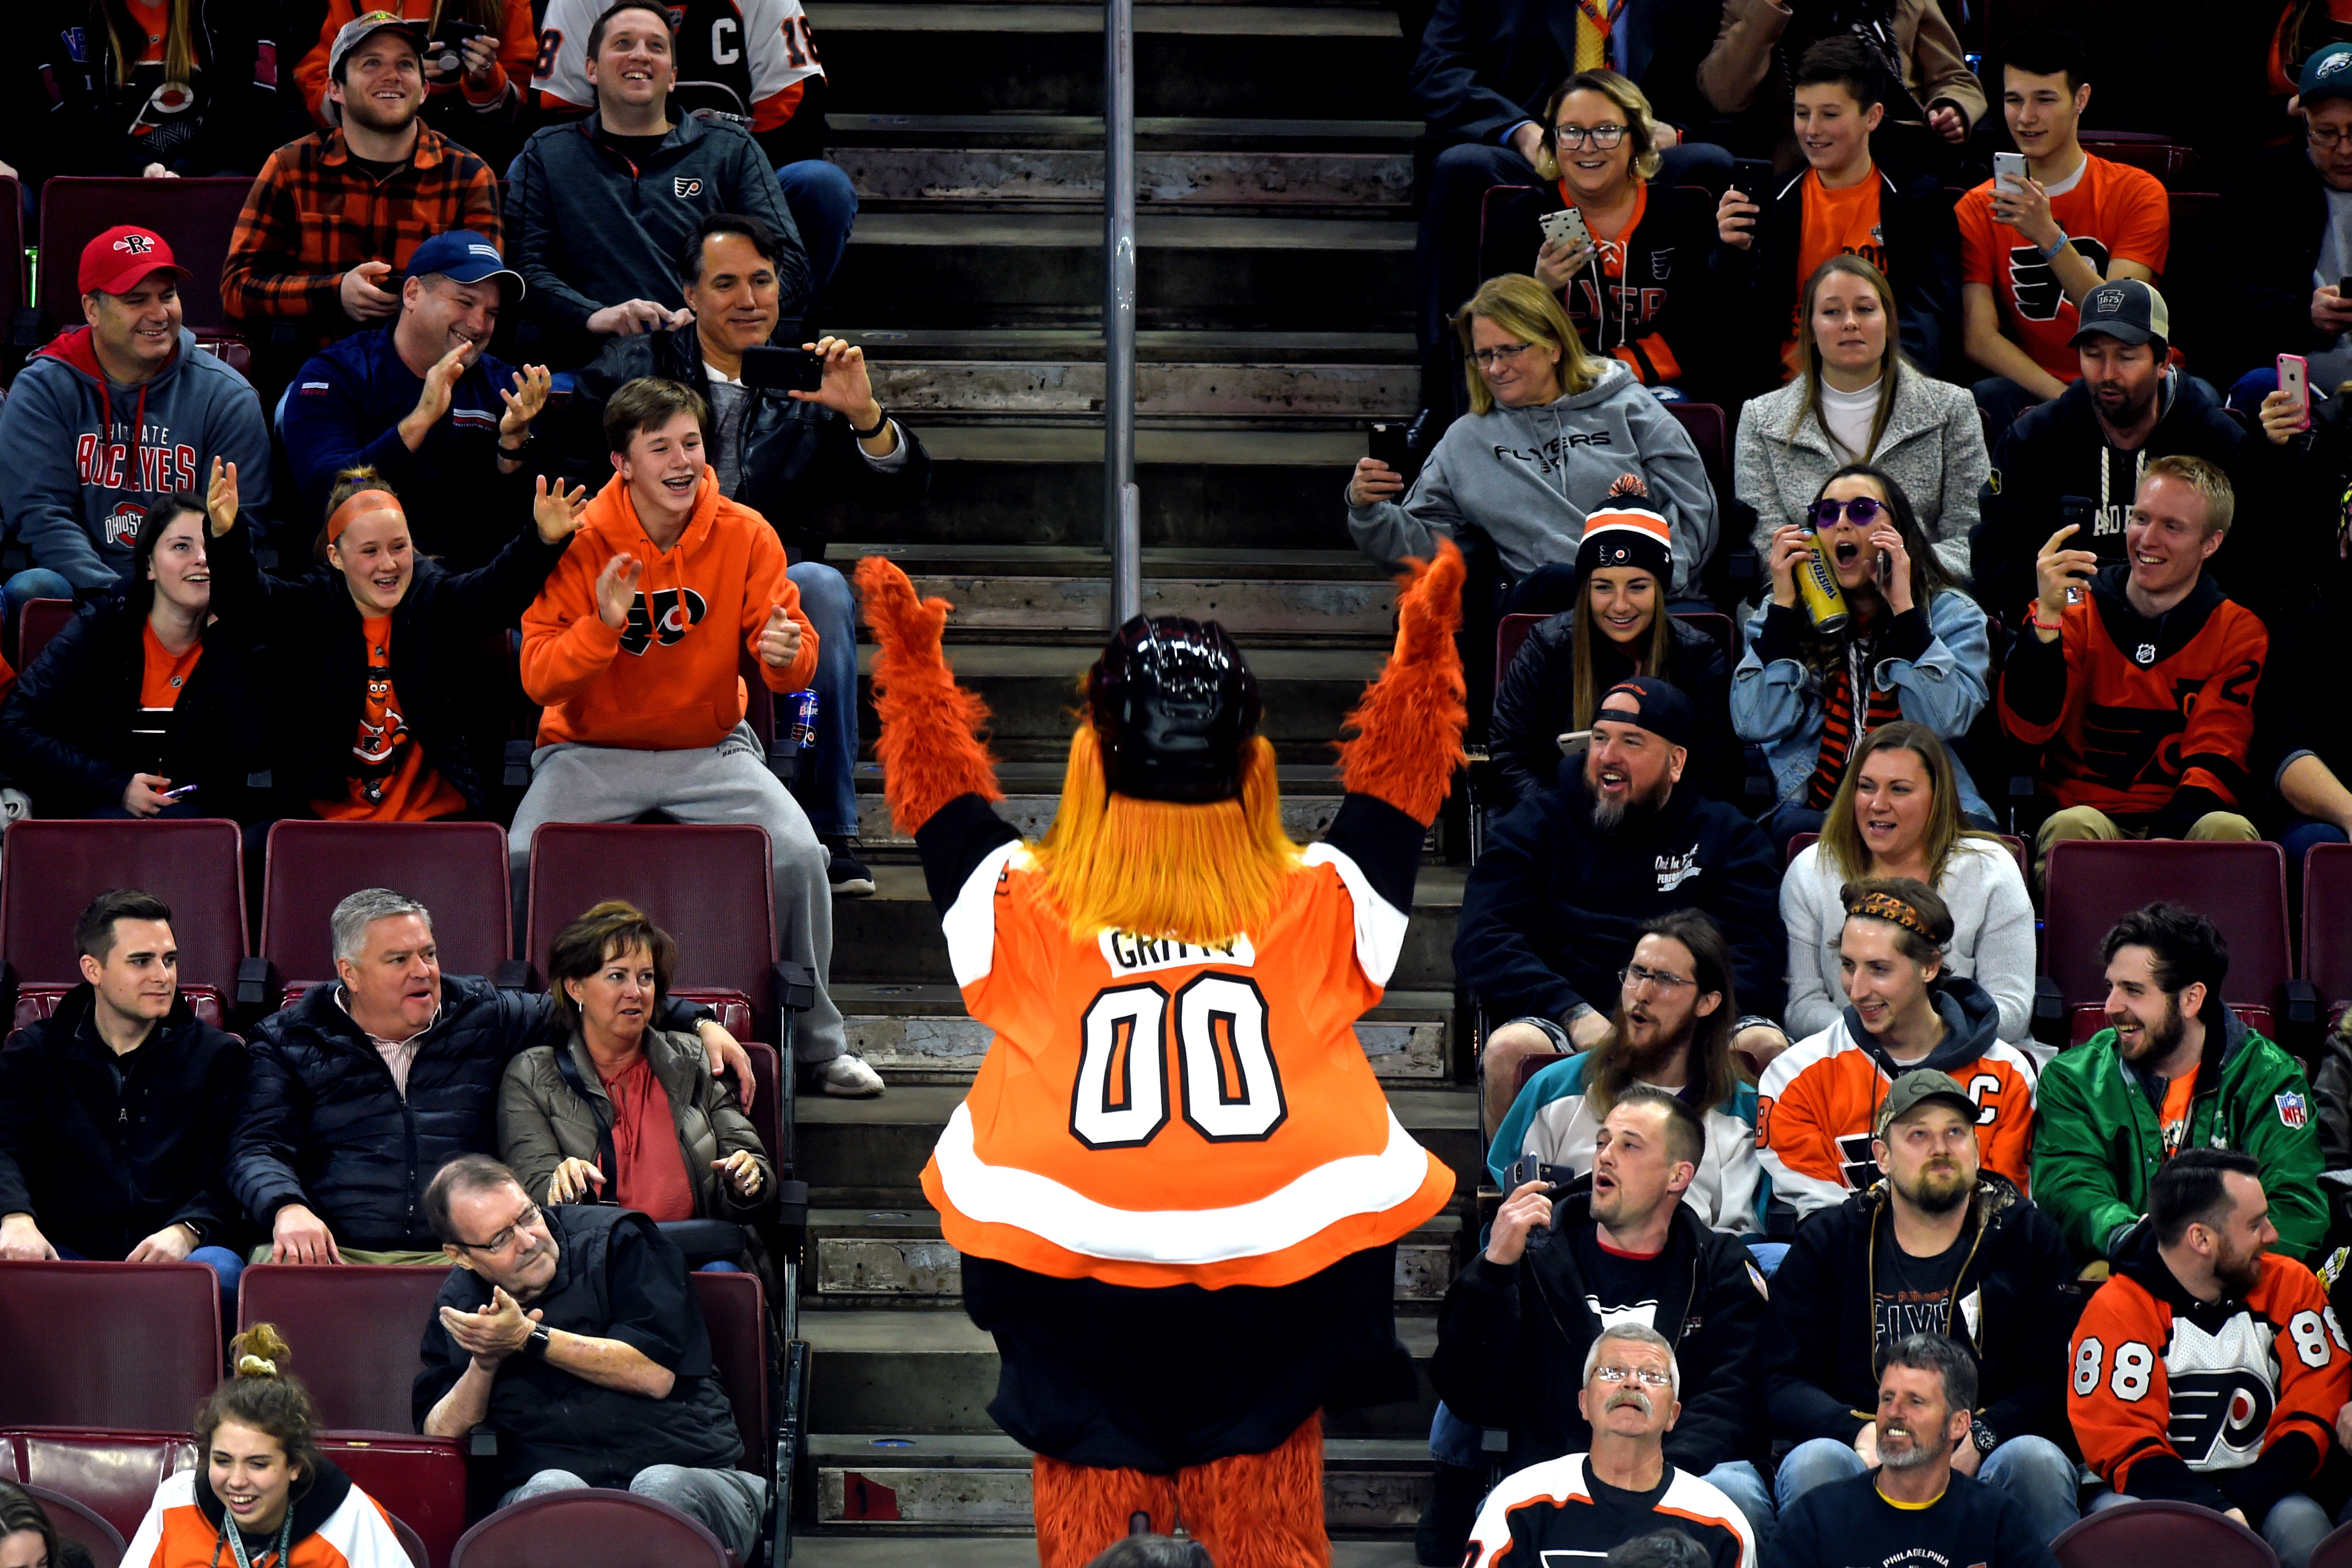 At long last, Flyers fans return to the Wells Fargo Center